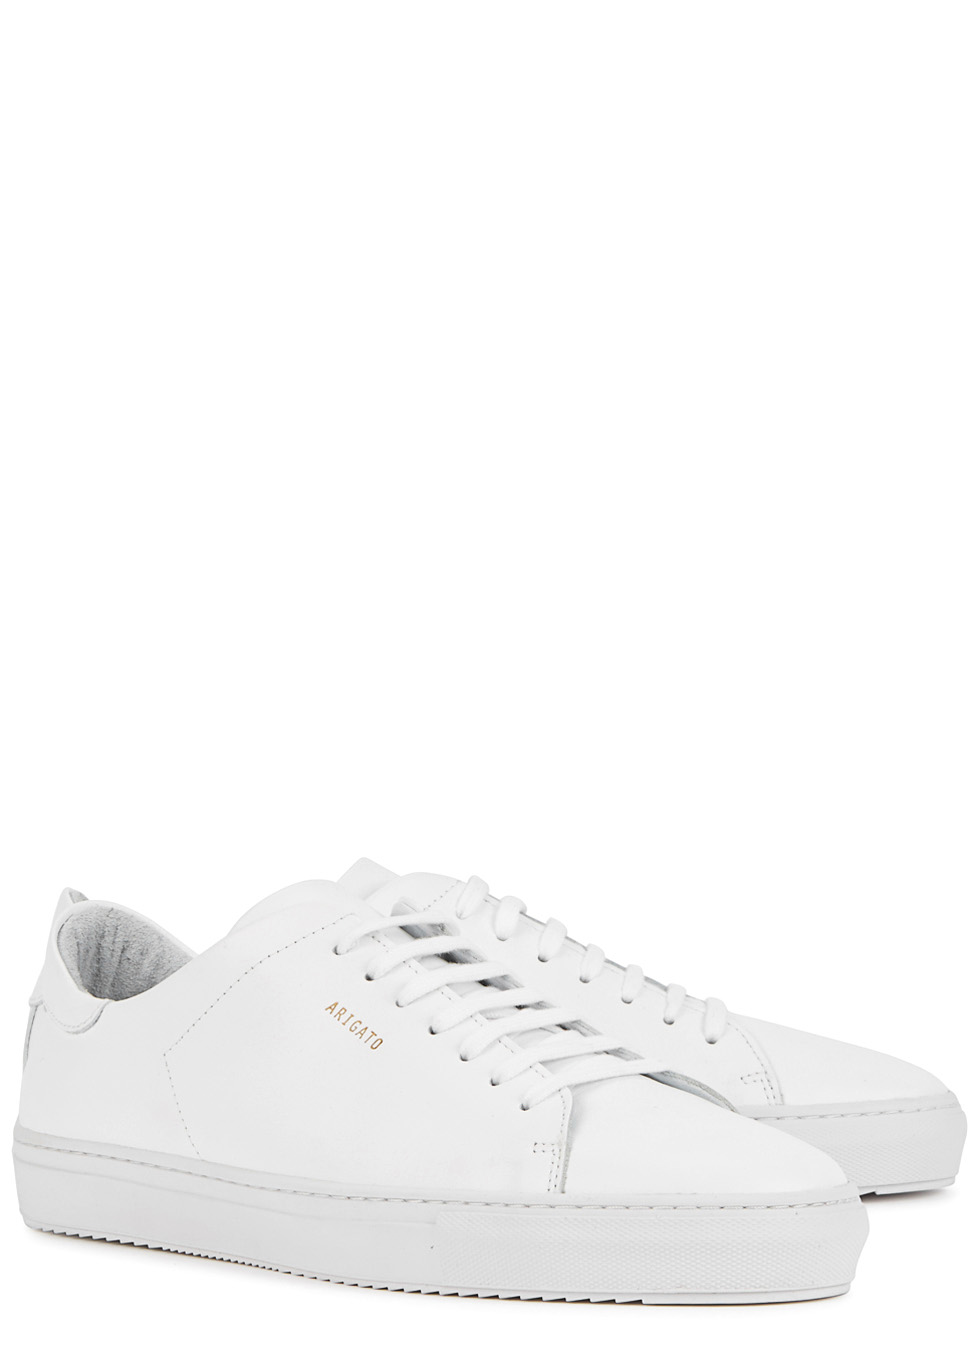 clean 9 sneaker white leather